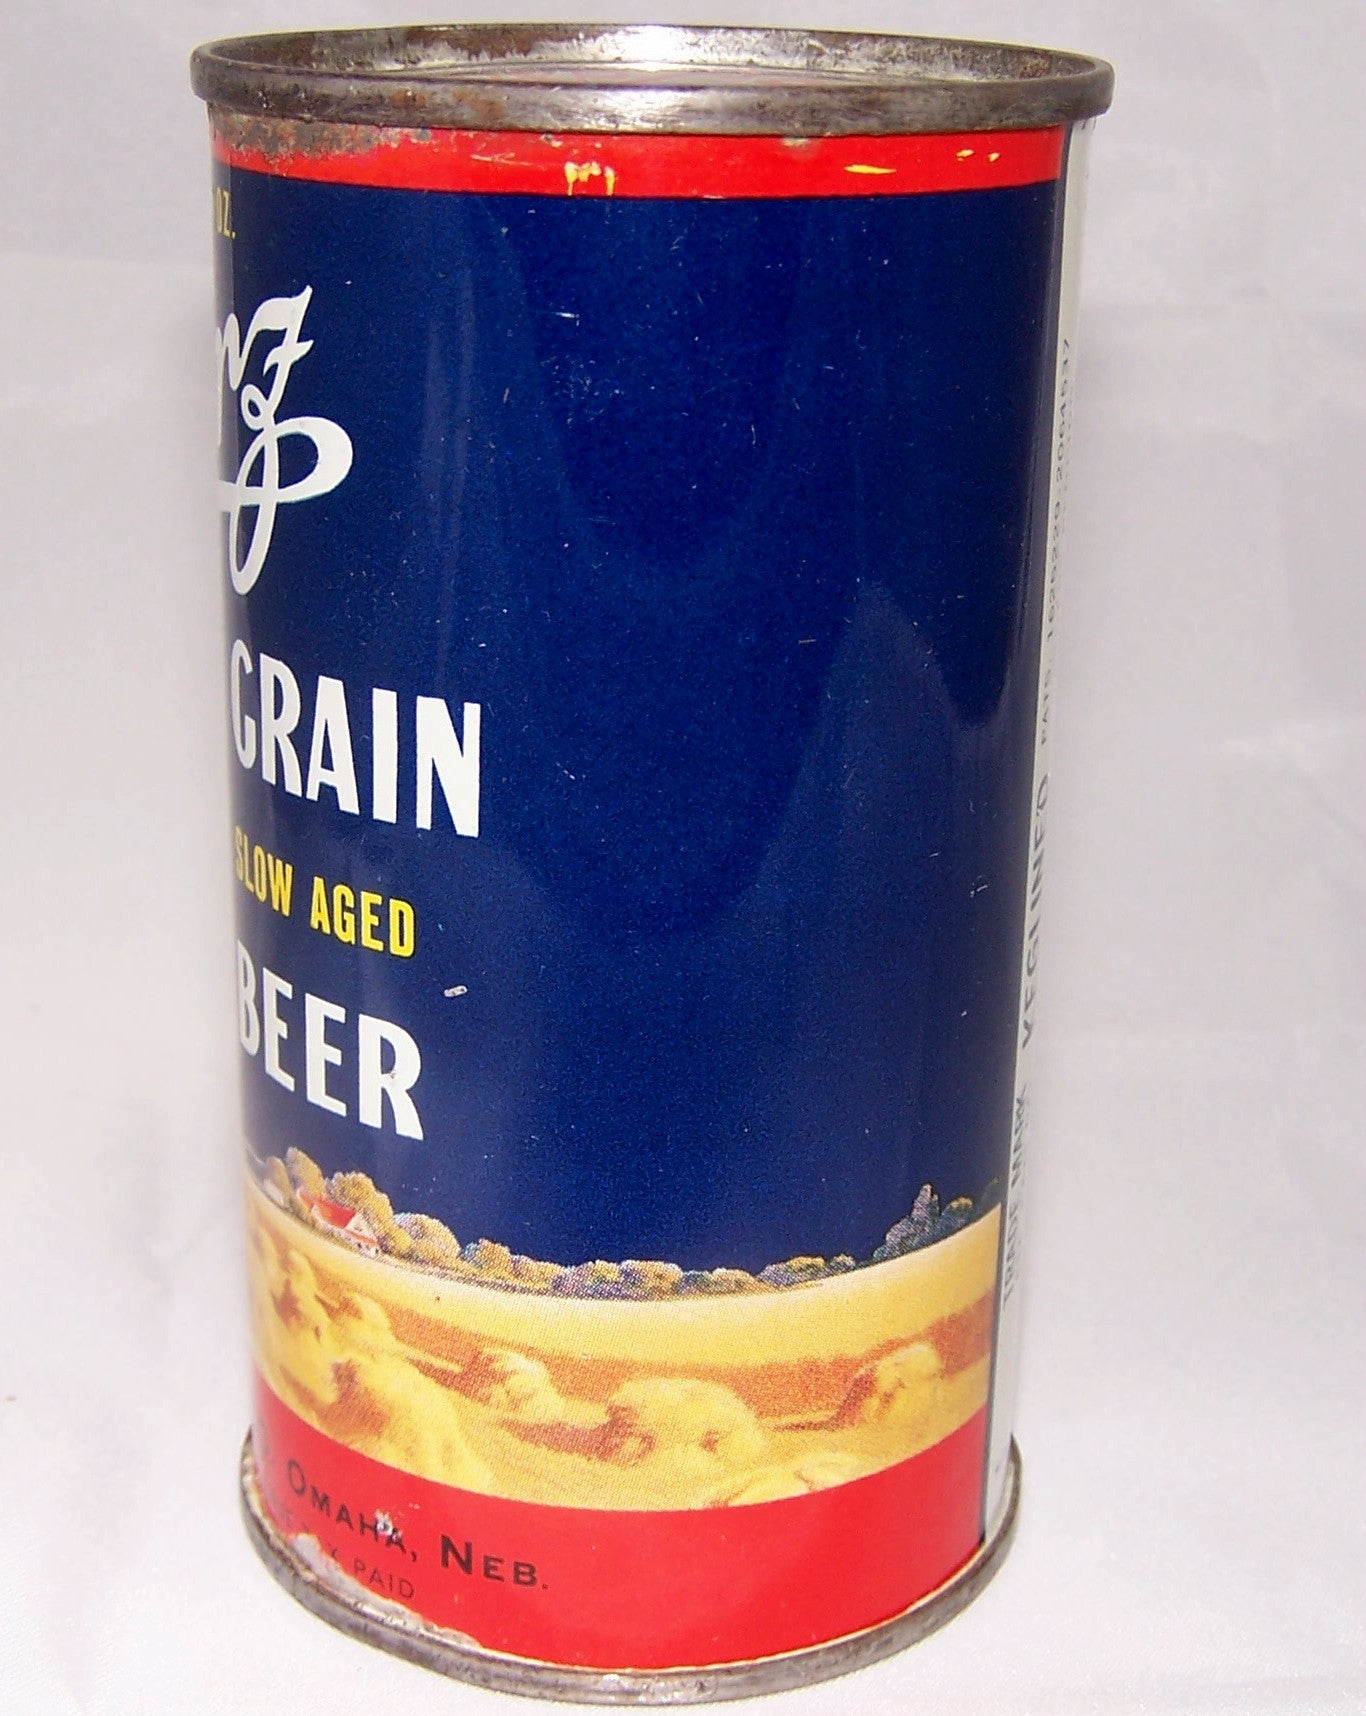 Storz All Grain Slow Aged Beer, USBC 137-15, Grade 1 Sold 12/30/15